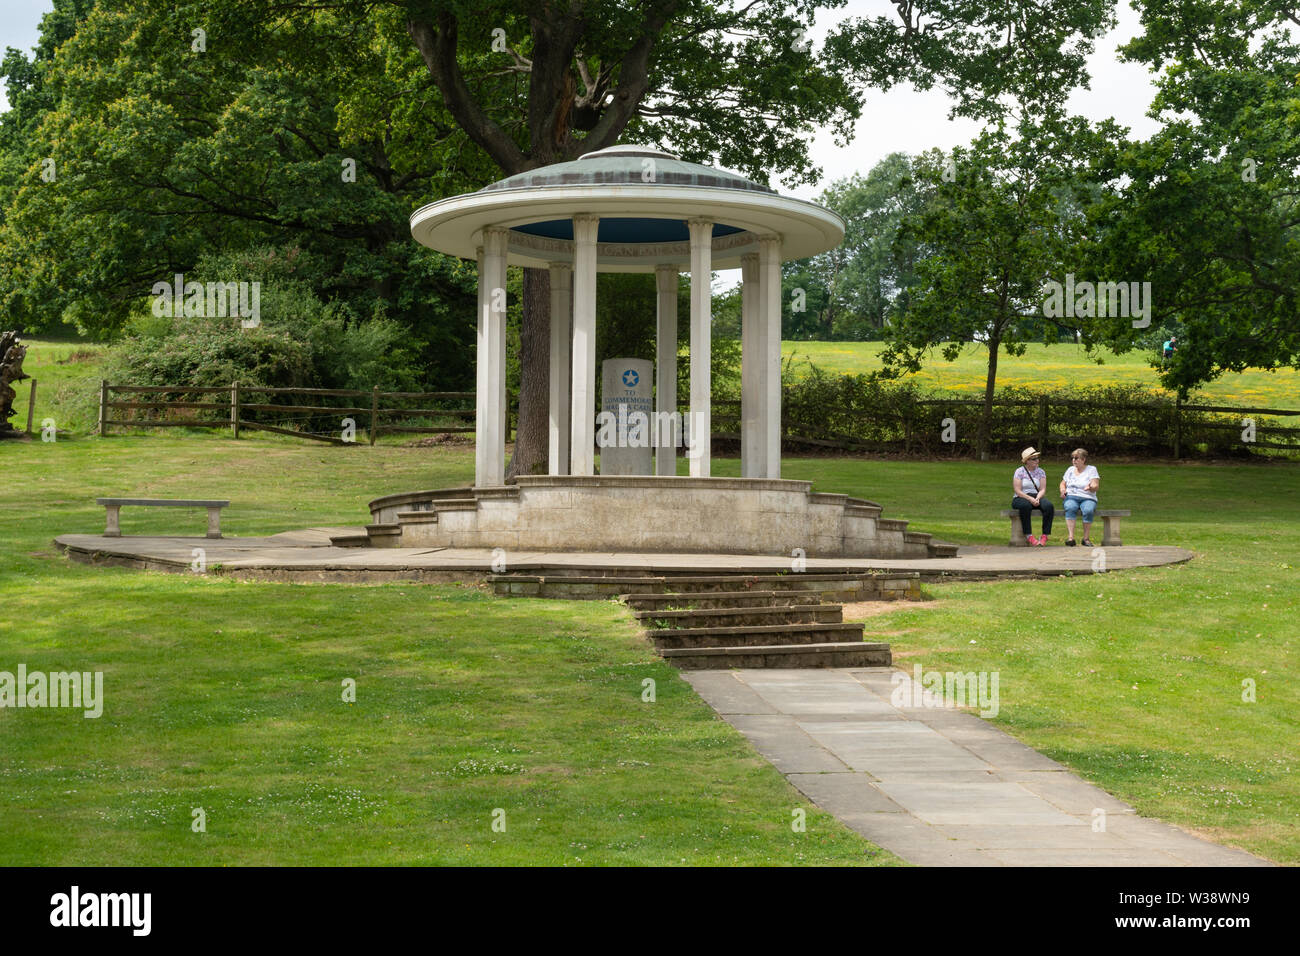 Magna Carta Memorial, Runnymede, Surrey, UK, that was created by the American Bar Association (ABA) to a design by Sir Edward Maufe Stock Photo